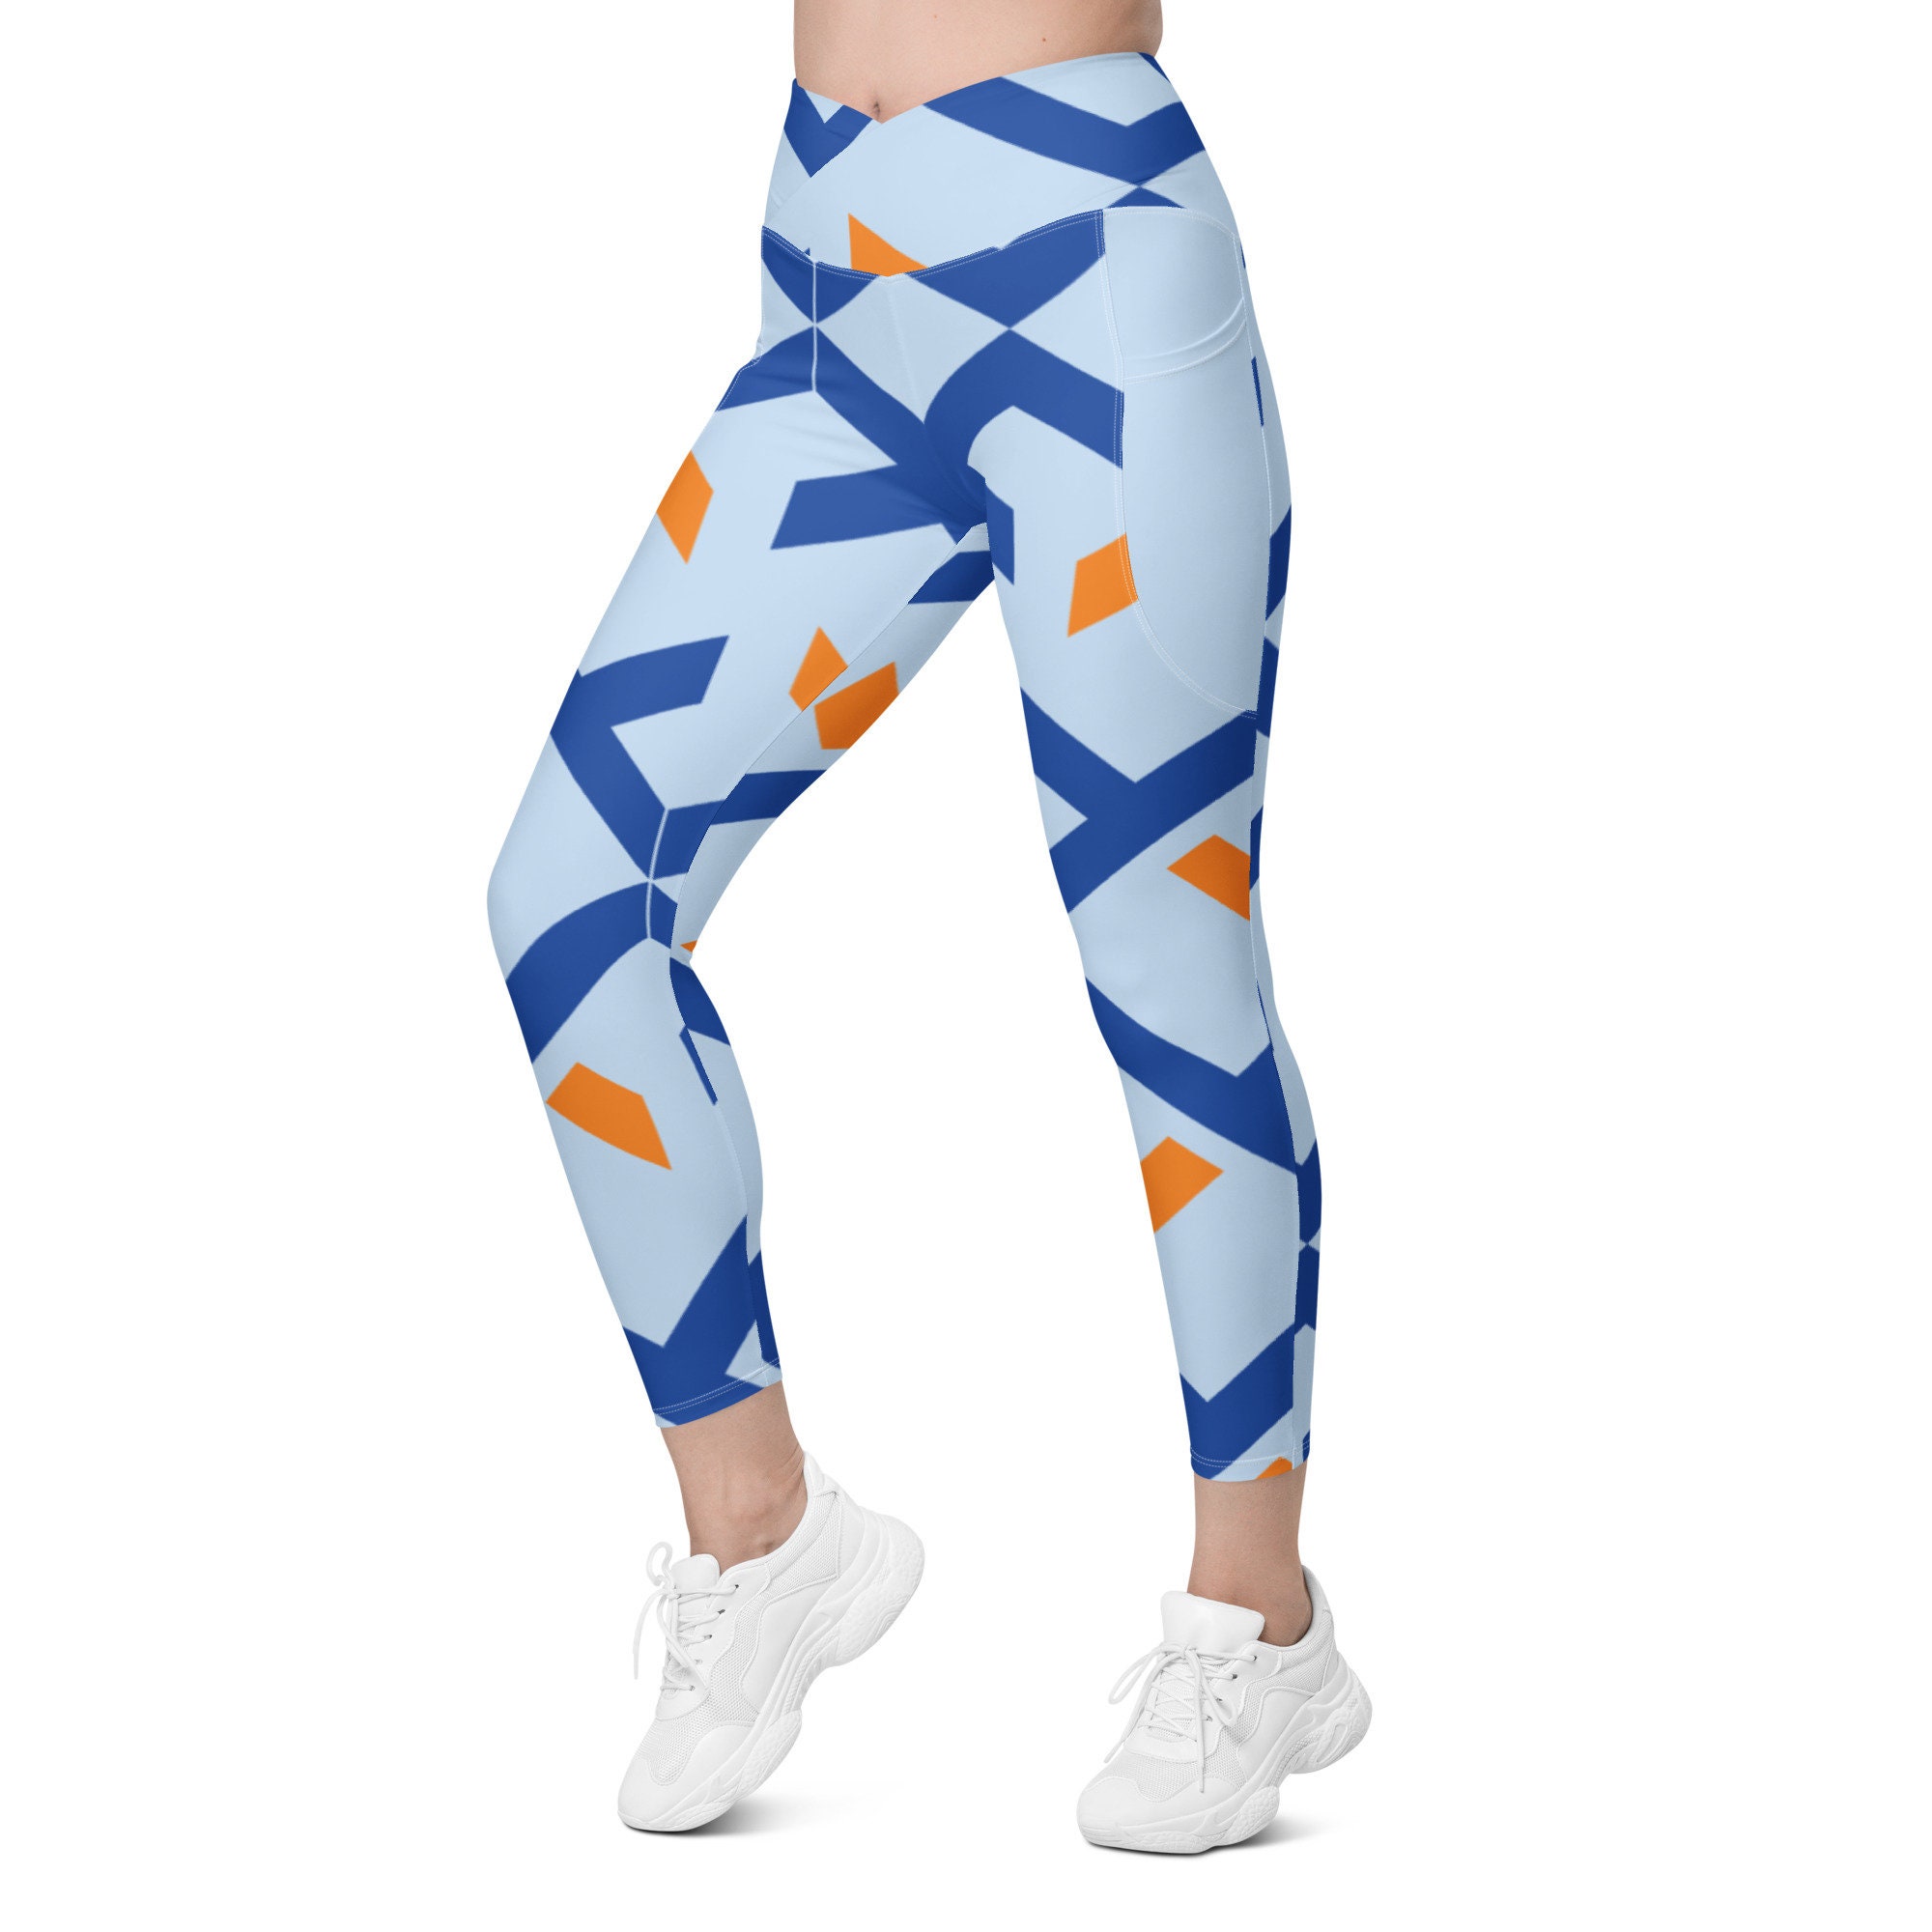 EXp Realty leggings with pockets, eXp Realty Crossover leggings with  pockets, eXp realtor leggings sold by Workship Studio, SKU 323852